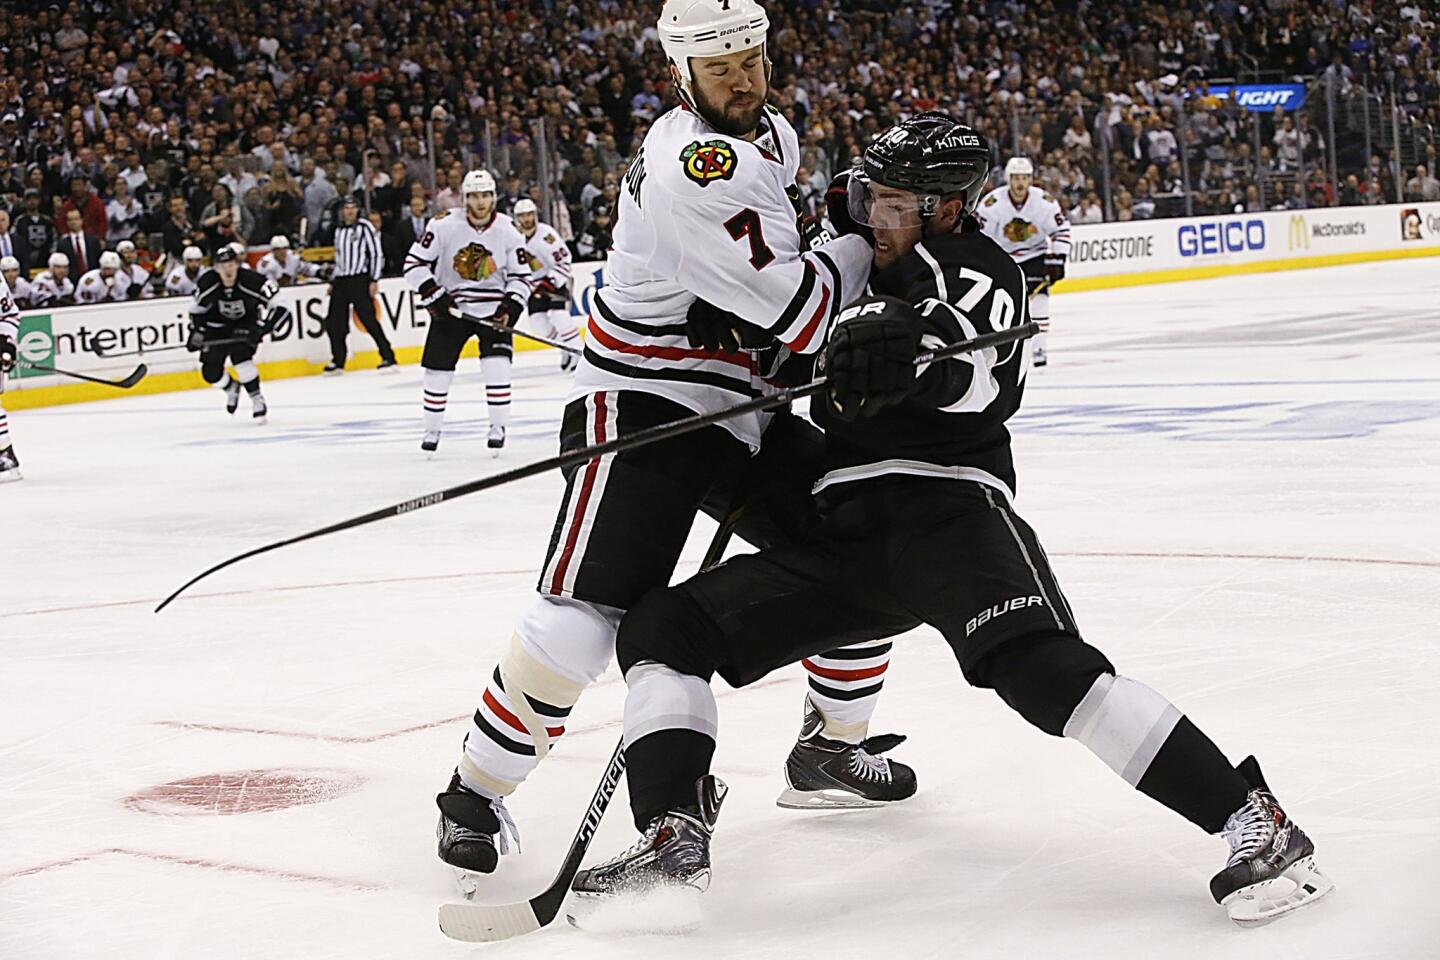 Brent Seabrook, Tanner Pearson